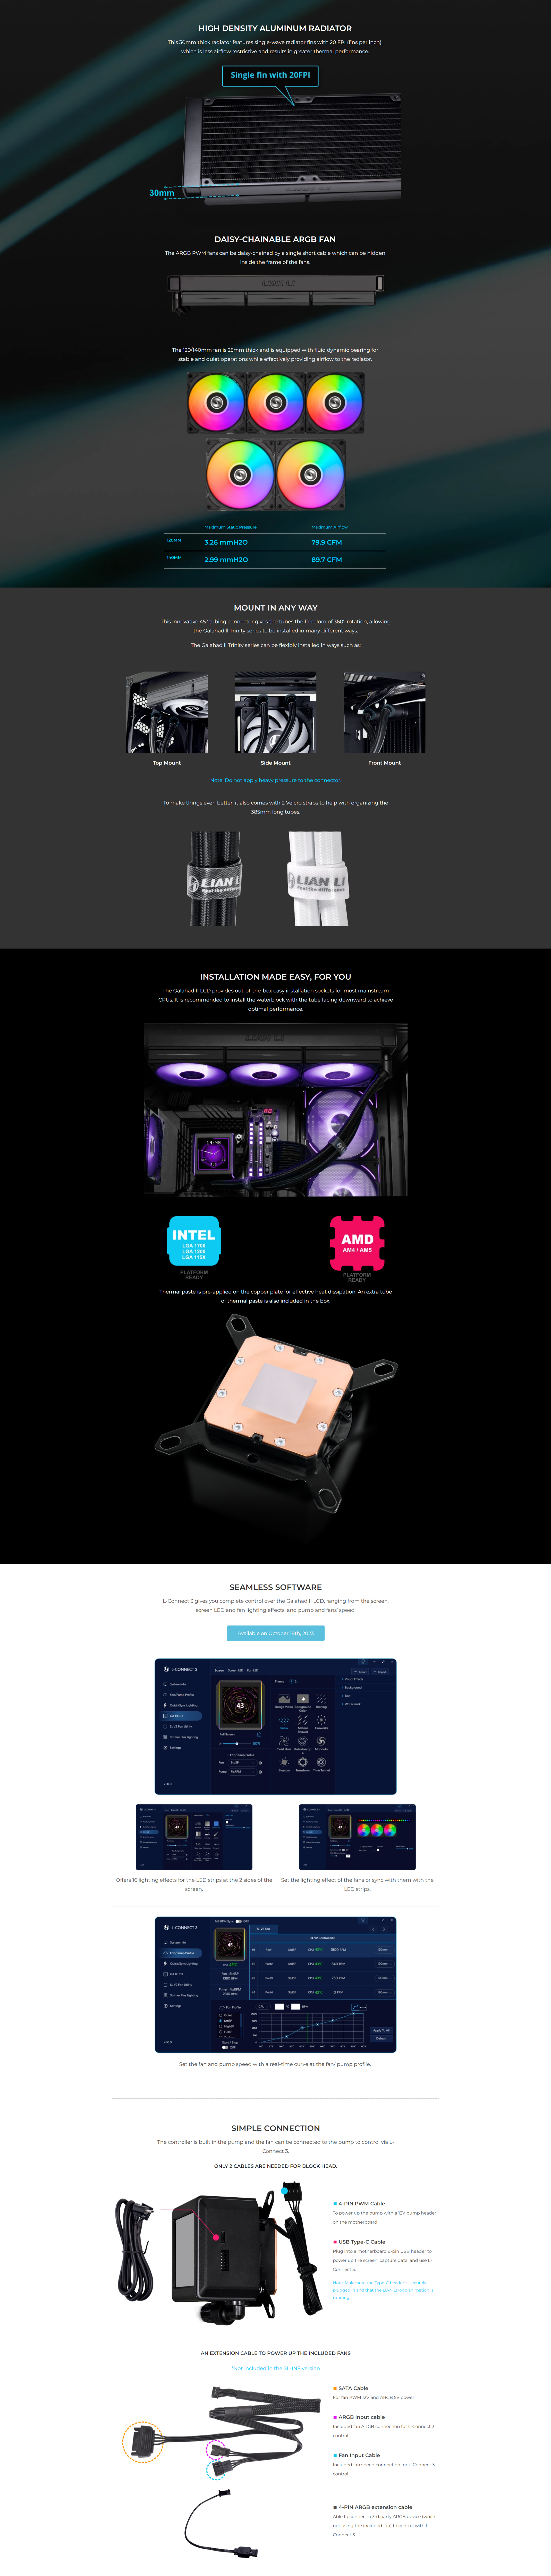 A large marketing image providing additional information about the product Lian Li Galahad II LCD 280 RGB 280mm AIO Liquid CPU Cooler - Black - Additional alt info not provided